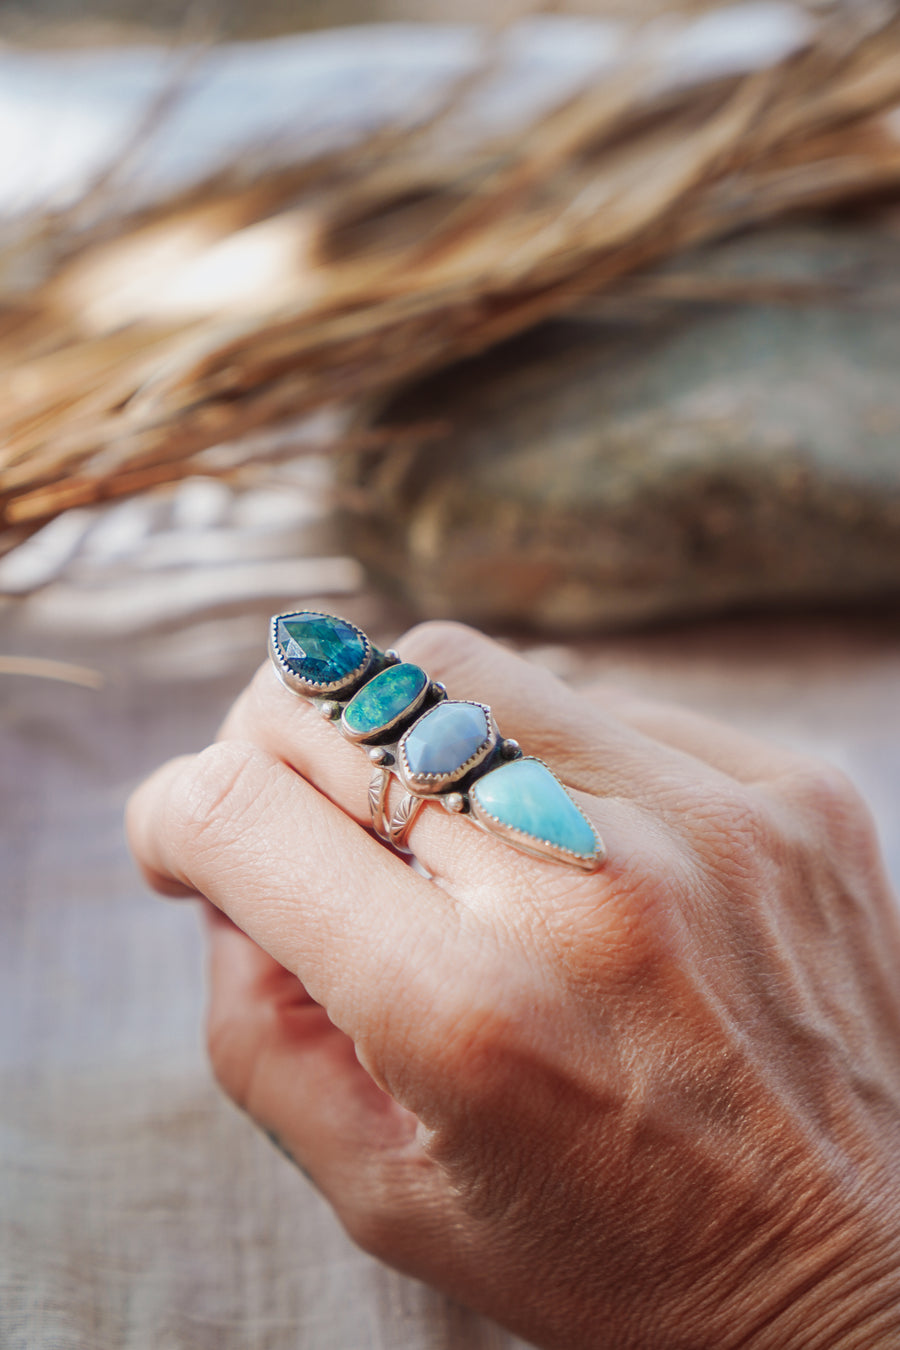 Cairn Ring in Larimar, Boulder Opal Doublet, & Faceted Blue Kyanite and Blue Calcite (Size 6.75)